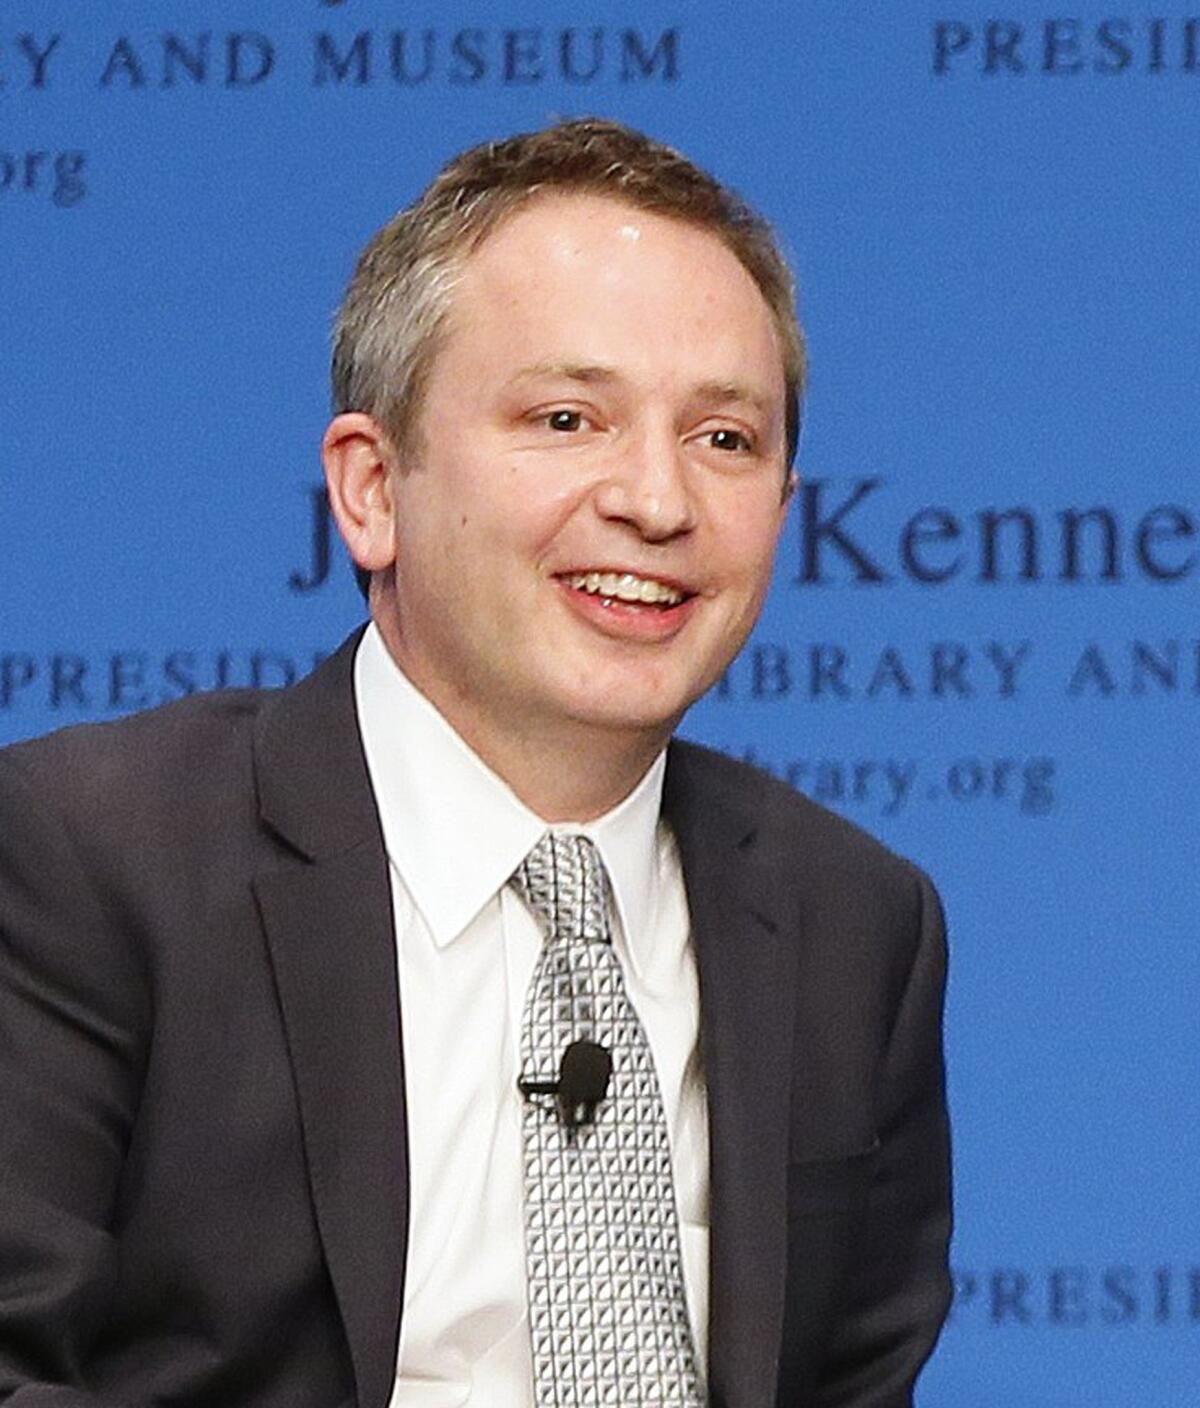 David Barron takes part in a forum at the John F. Kennedy Library in Boston in May 2013.